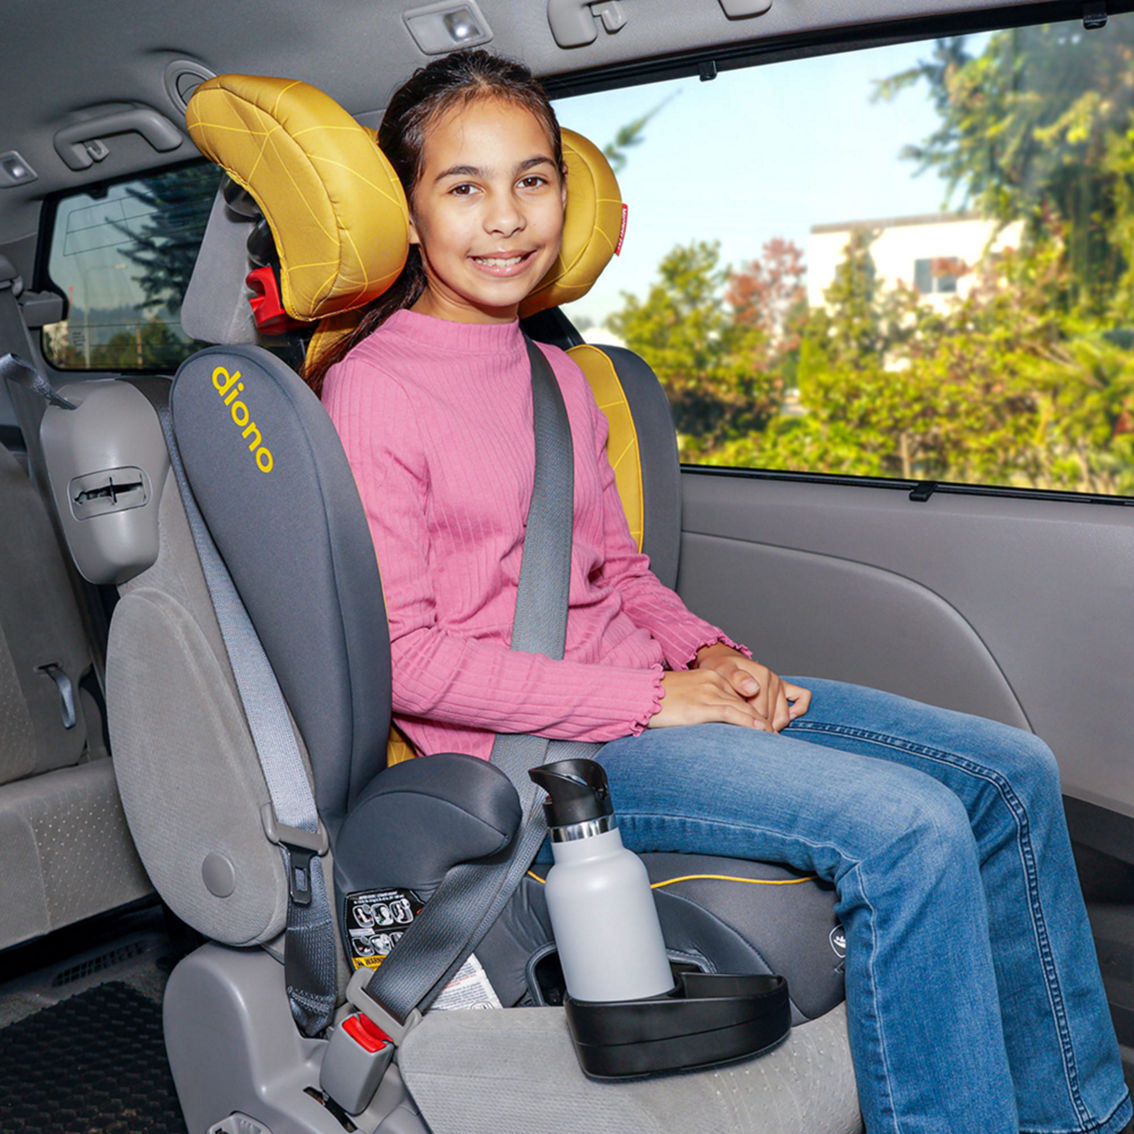 Diono Monterey® 2XT Latch 2-in-1 Booster Car Seat Plum - Image 3 of 5